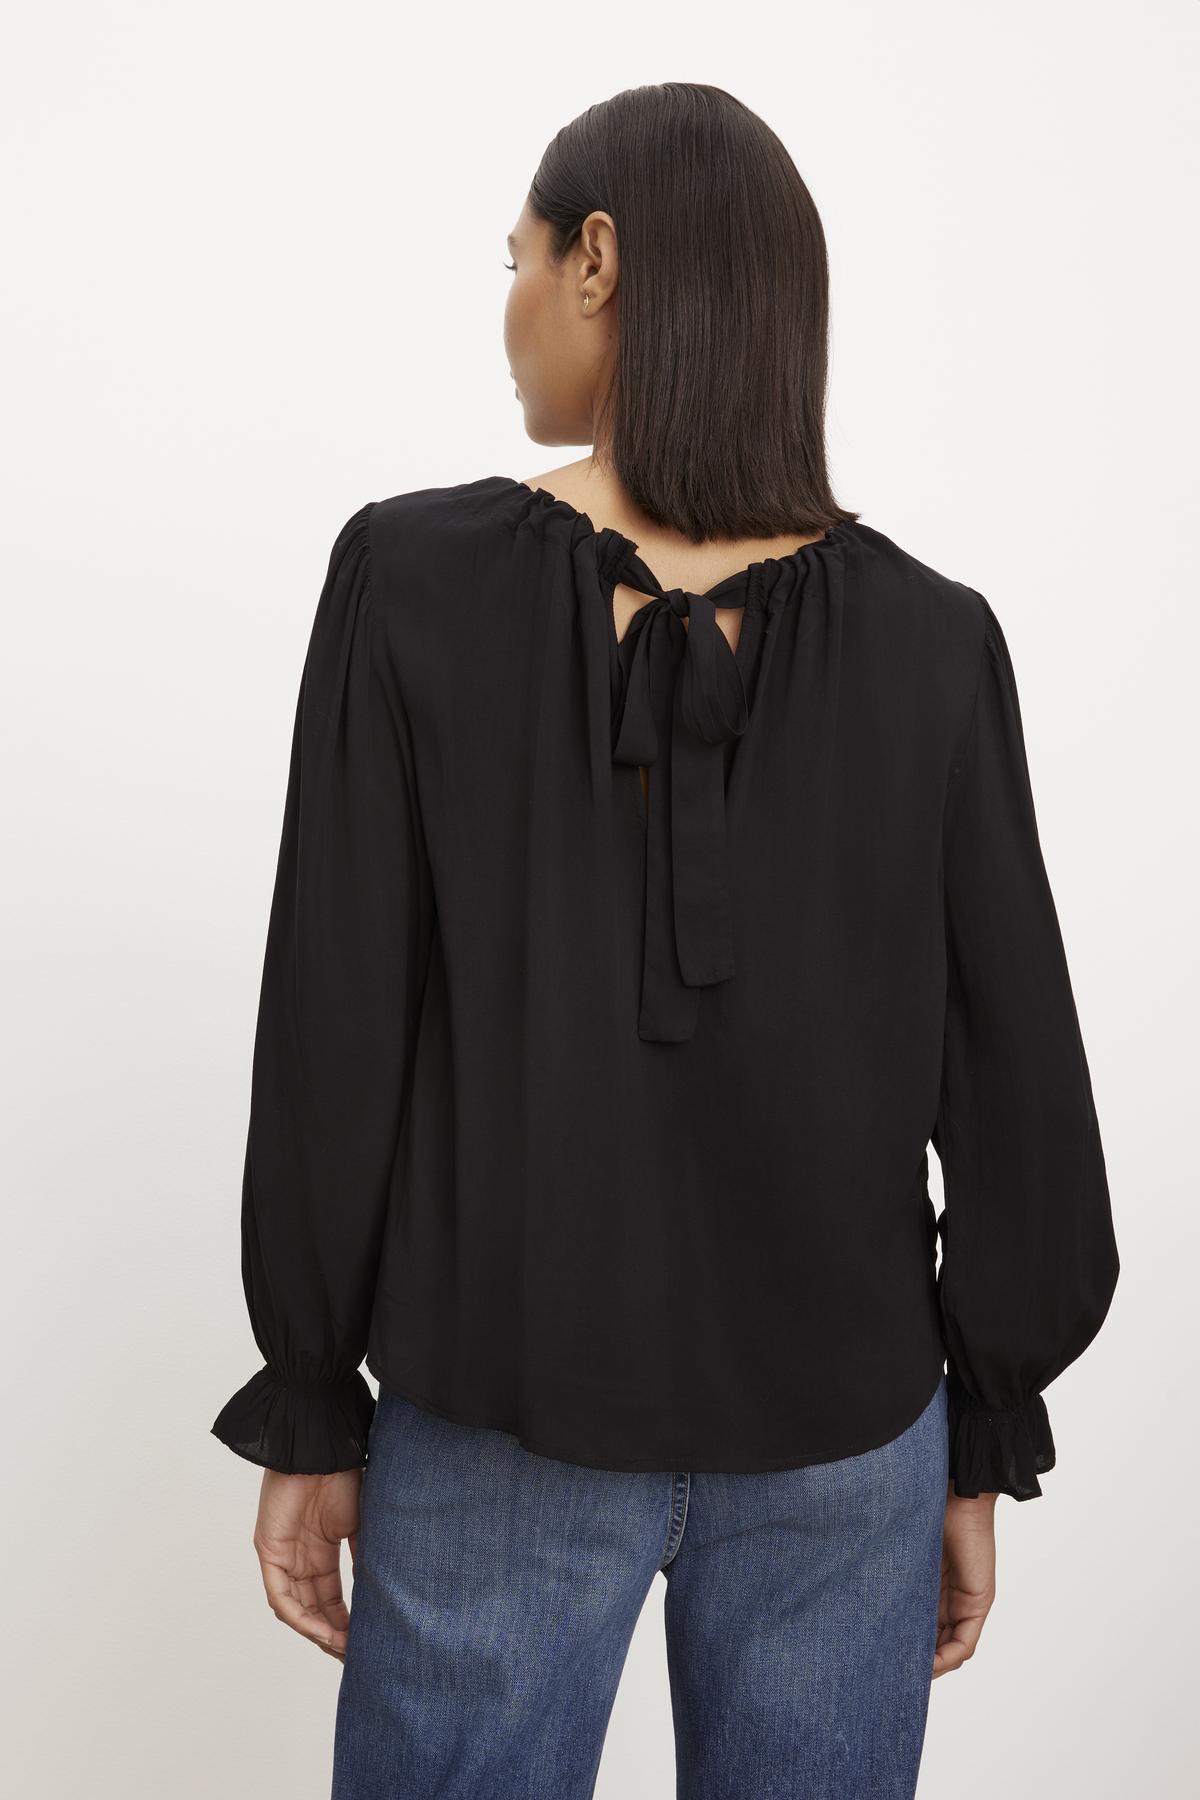 The back view of a woman wearing a Velvet by Graham & Spencer BRISTOL NECK TIE TOP with jeans.-36001351139521